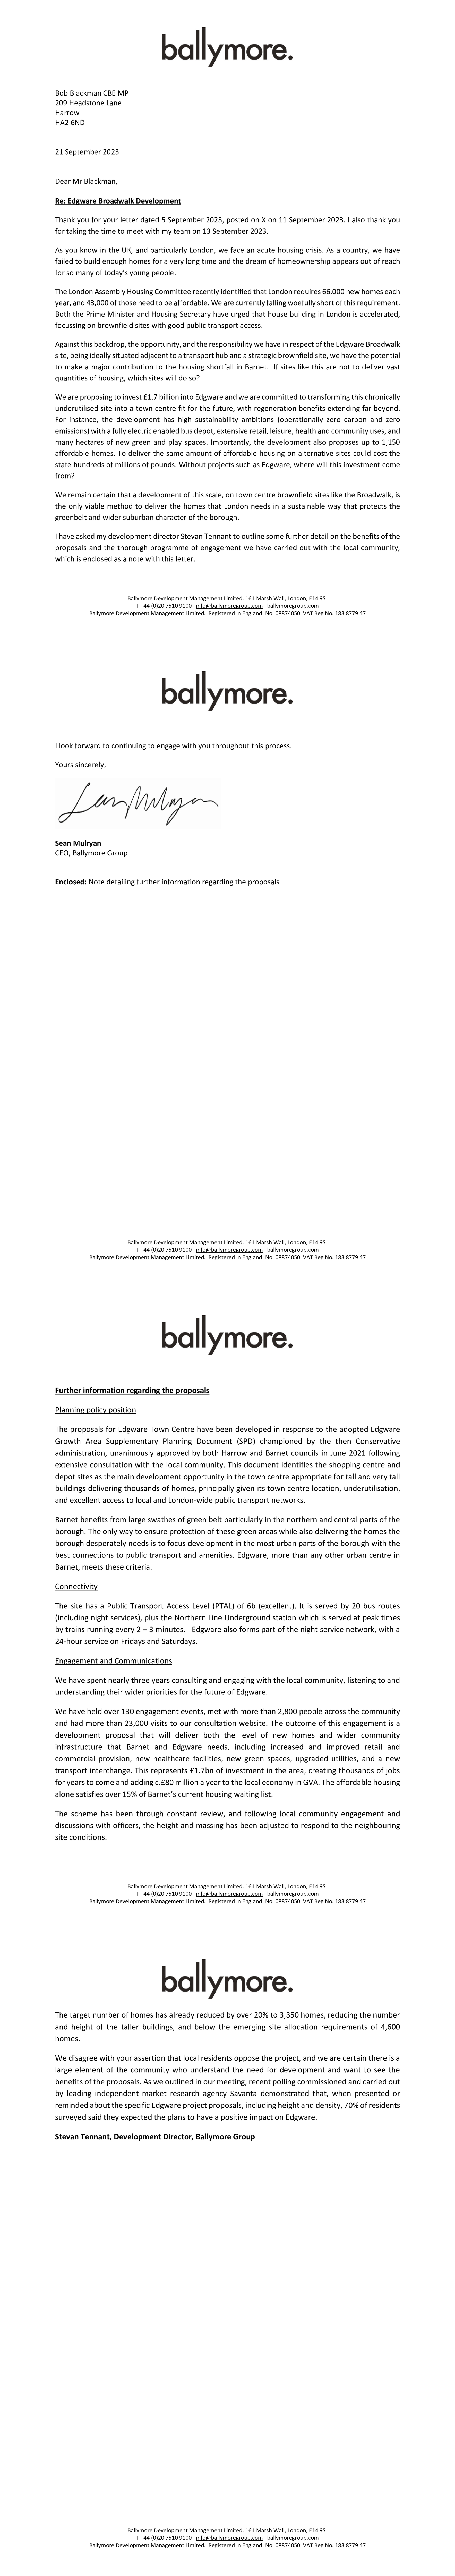 Letter from ballymore